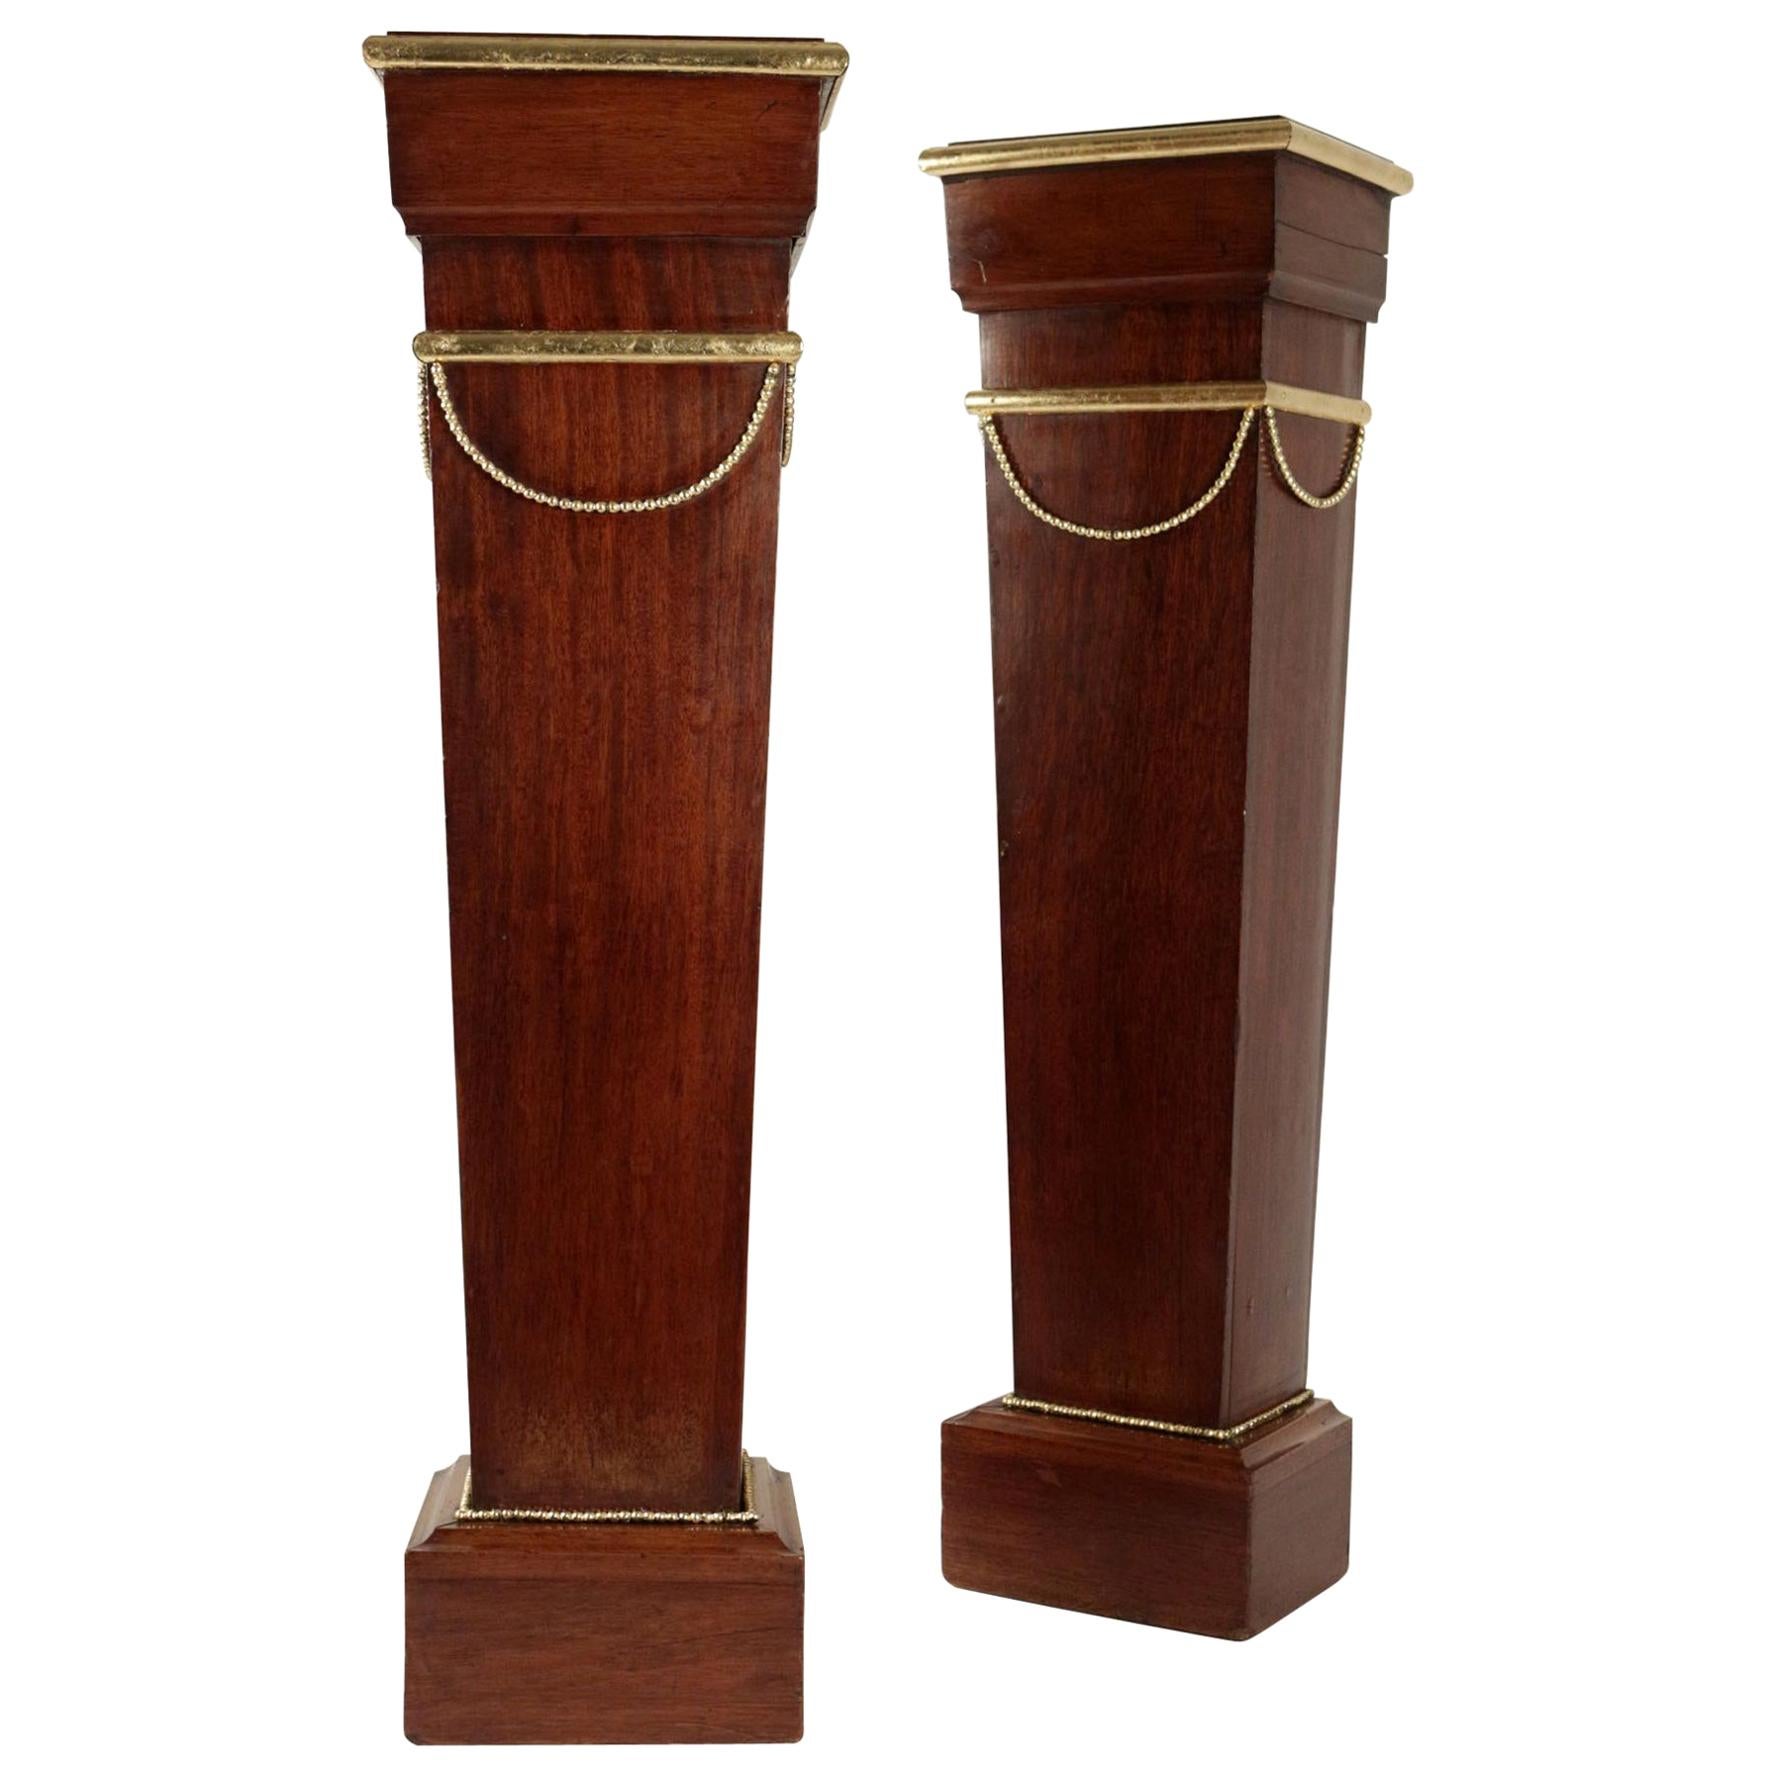 Pair of Sheaths, Consoles, Mahogany, Golden at the Gold Leaf, 19th Century